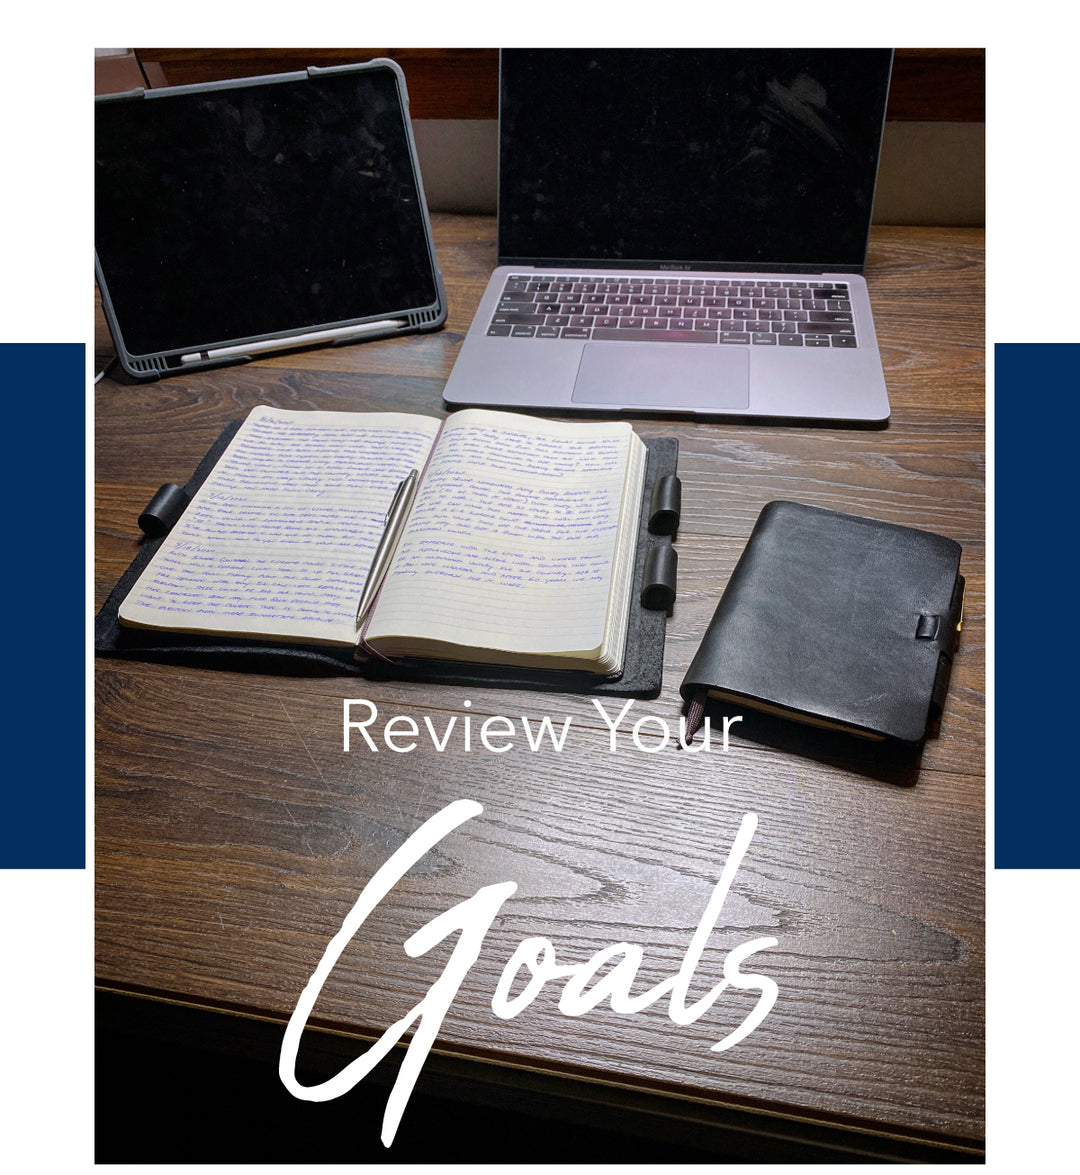 Review Your Goals - Pictured: Onyx Classic Cut Refillable Leather Journal, Onyx Mini Cut Refillable Leather Journal, Stainless steel Parker Jotter pen, Macbook, iPad, desk setup, journal entry.